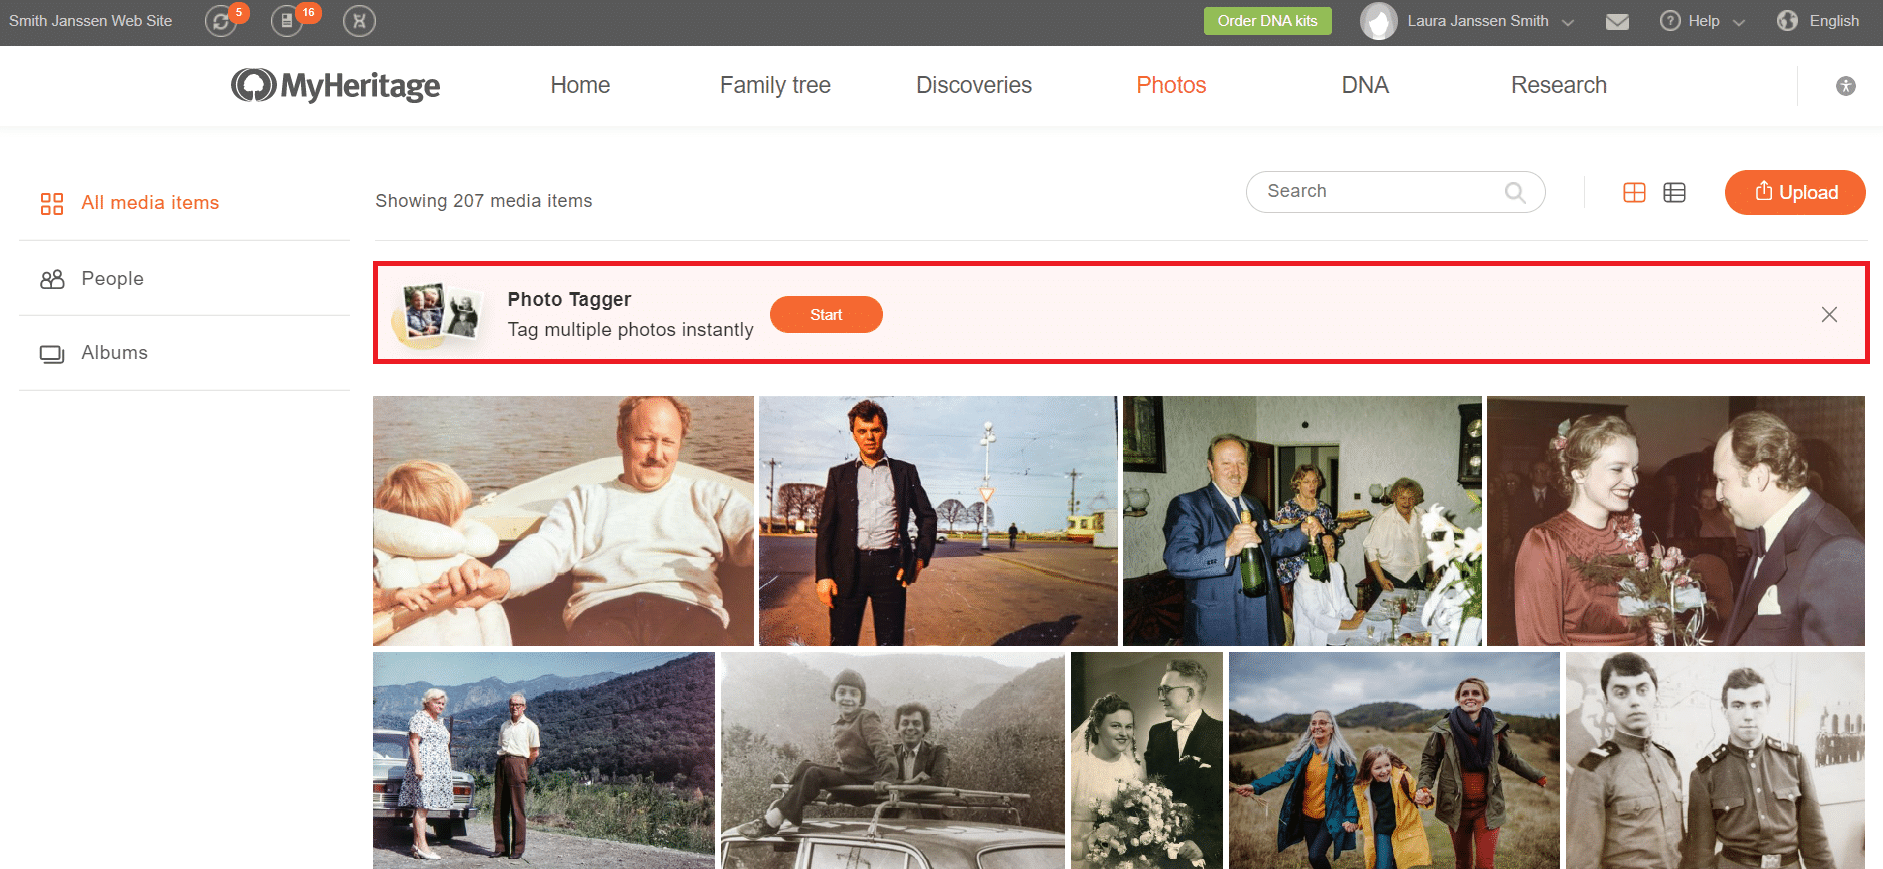 Accessing Photo Tagger via a banner on the “My Photos” page (click to zoom)